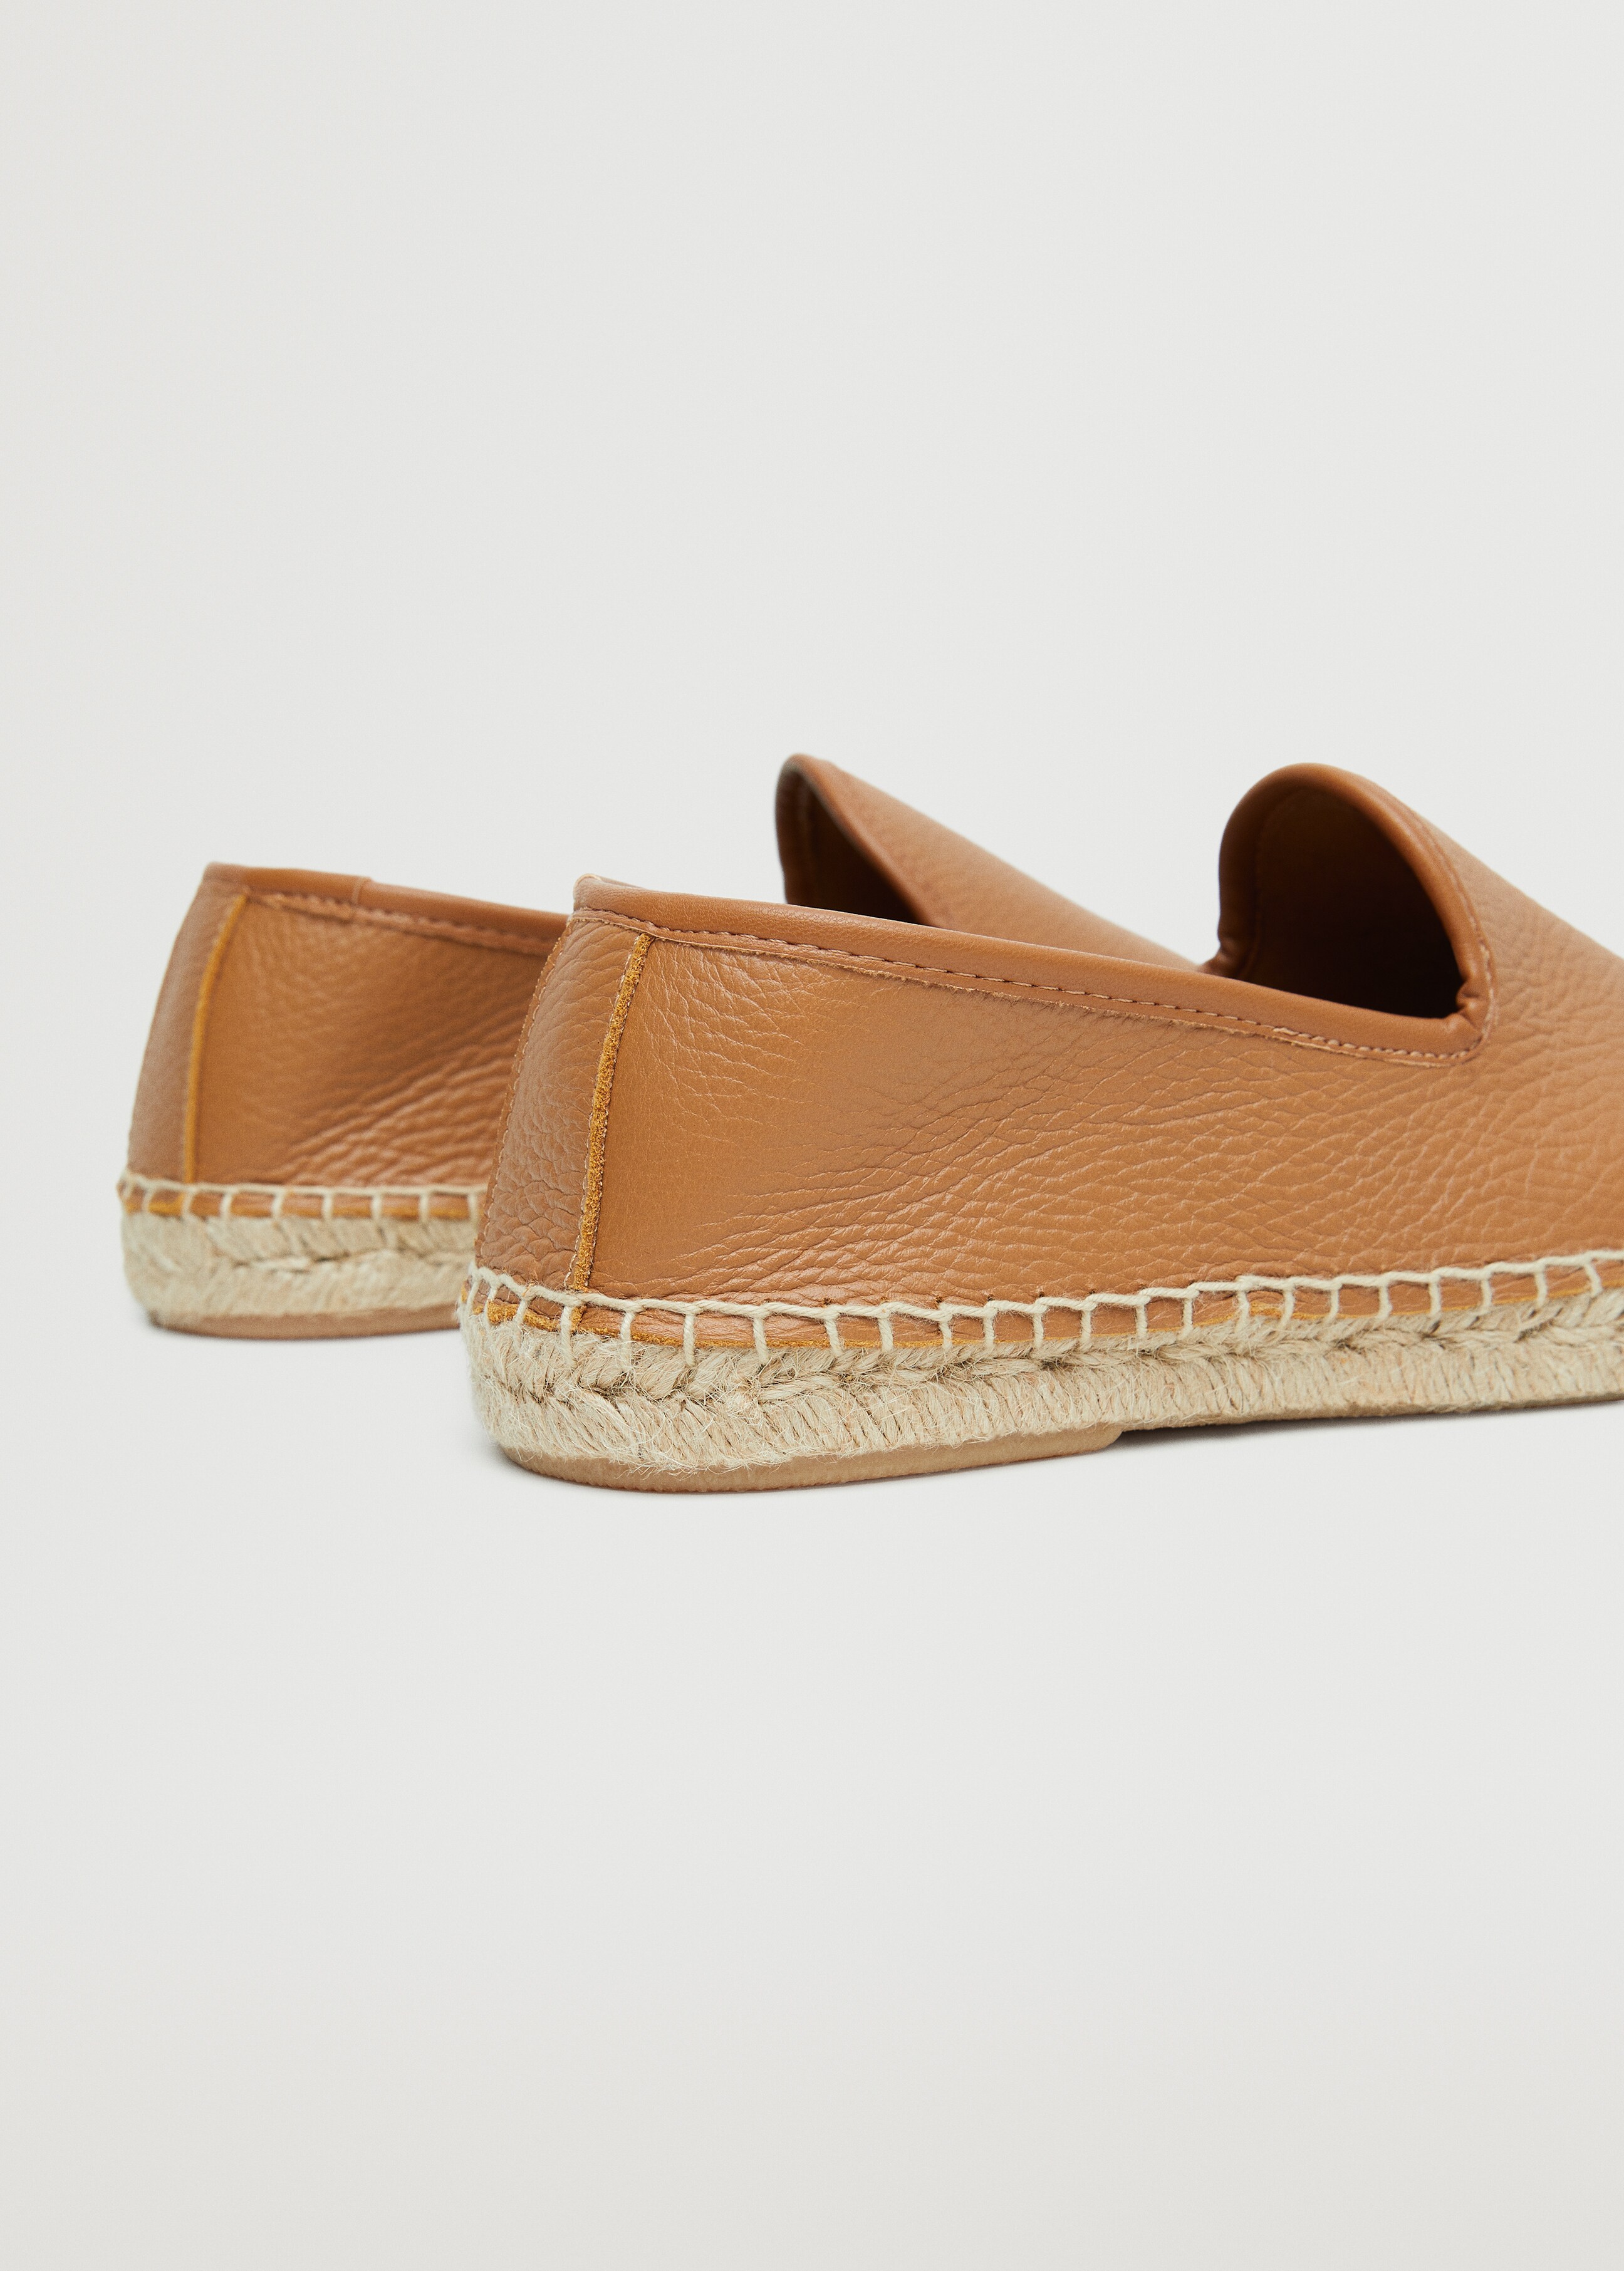 Jute leather espadrilles - Details of the article 2